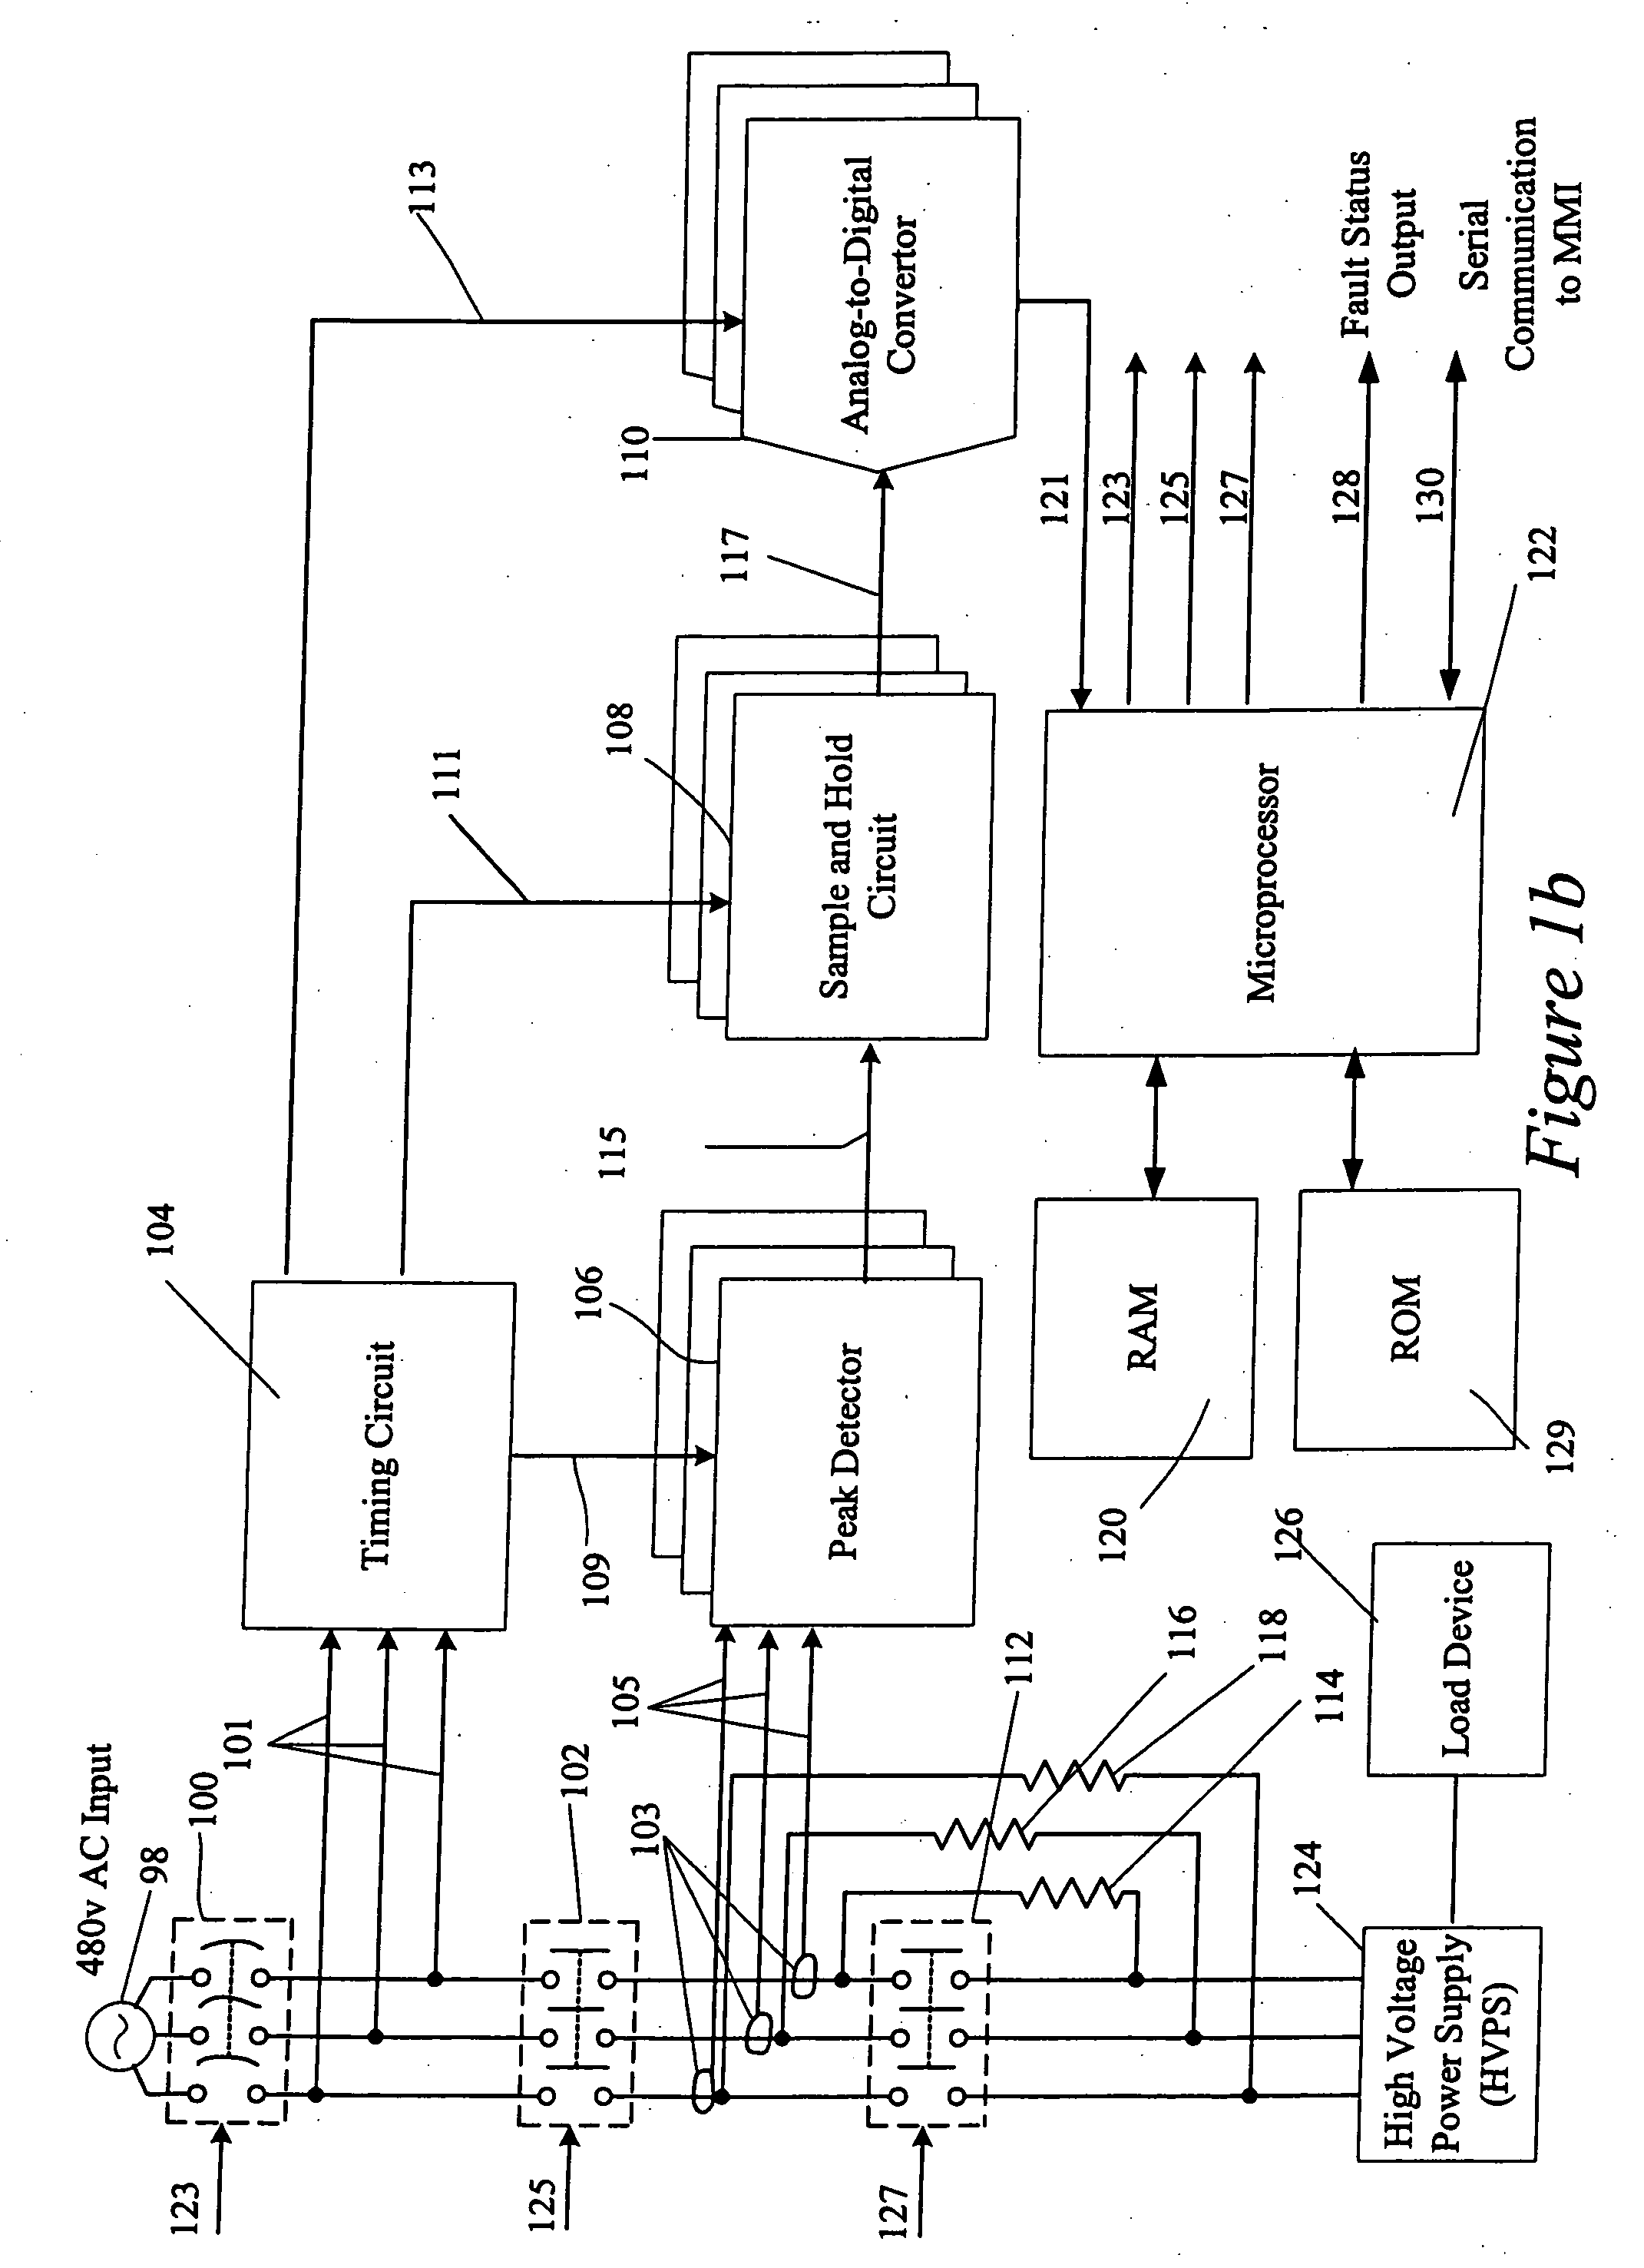 Apparatus, method and computer program product for monitoring AC line current through the step start resistors of a high voltage power supply